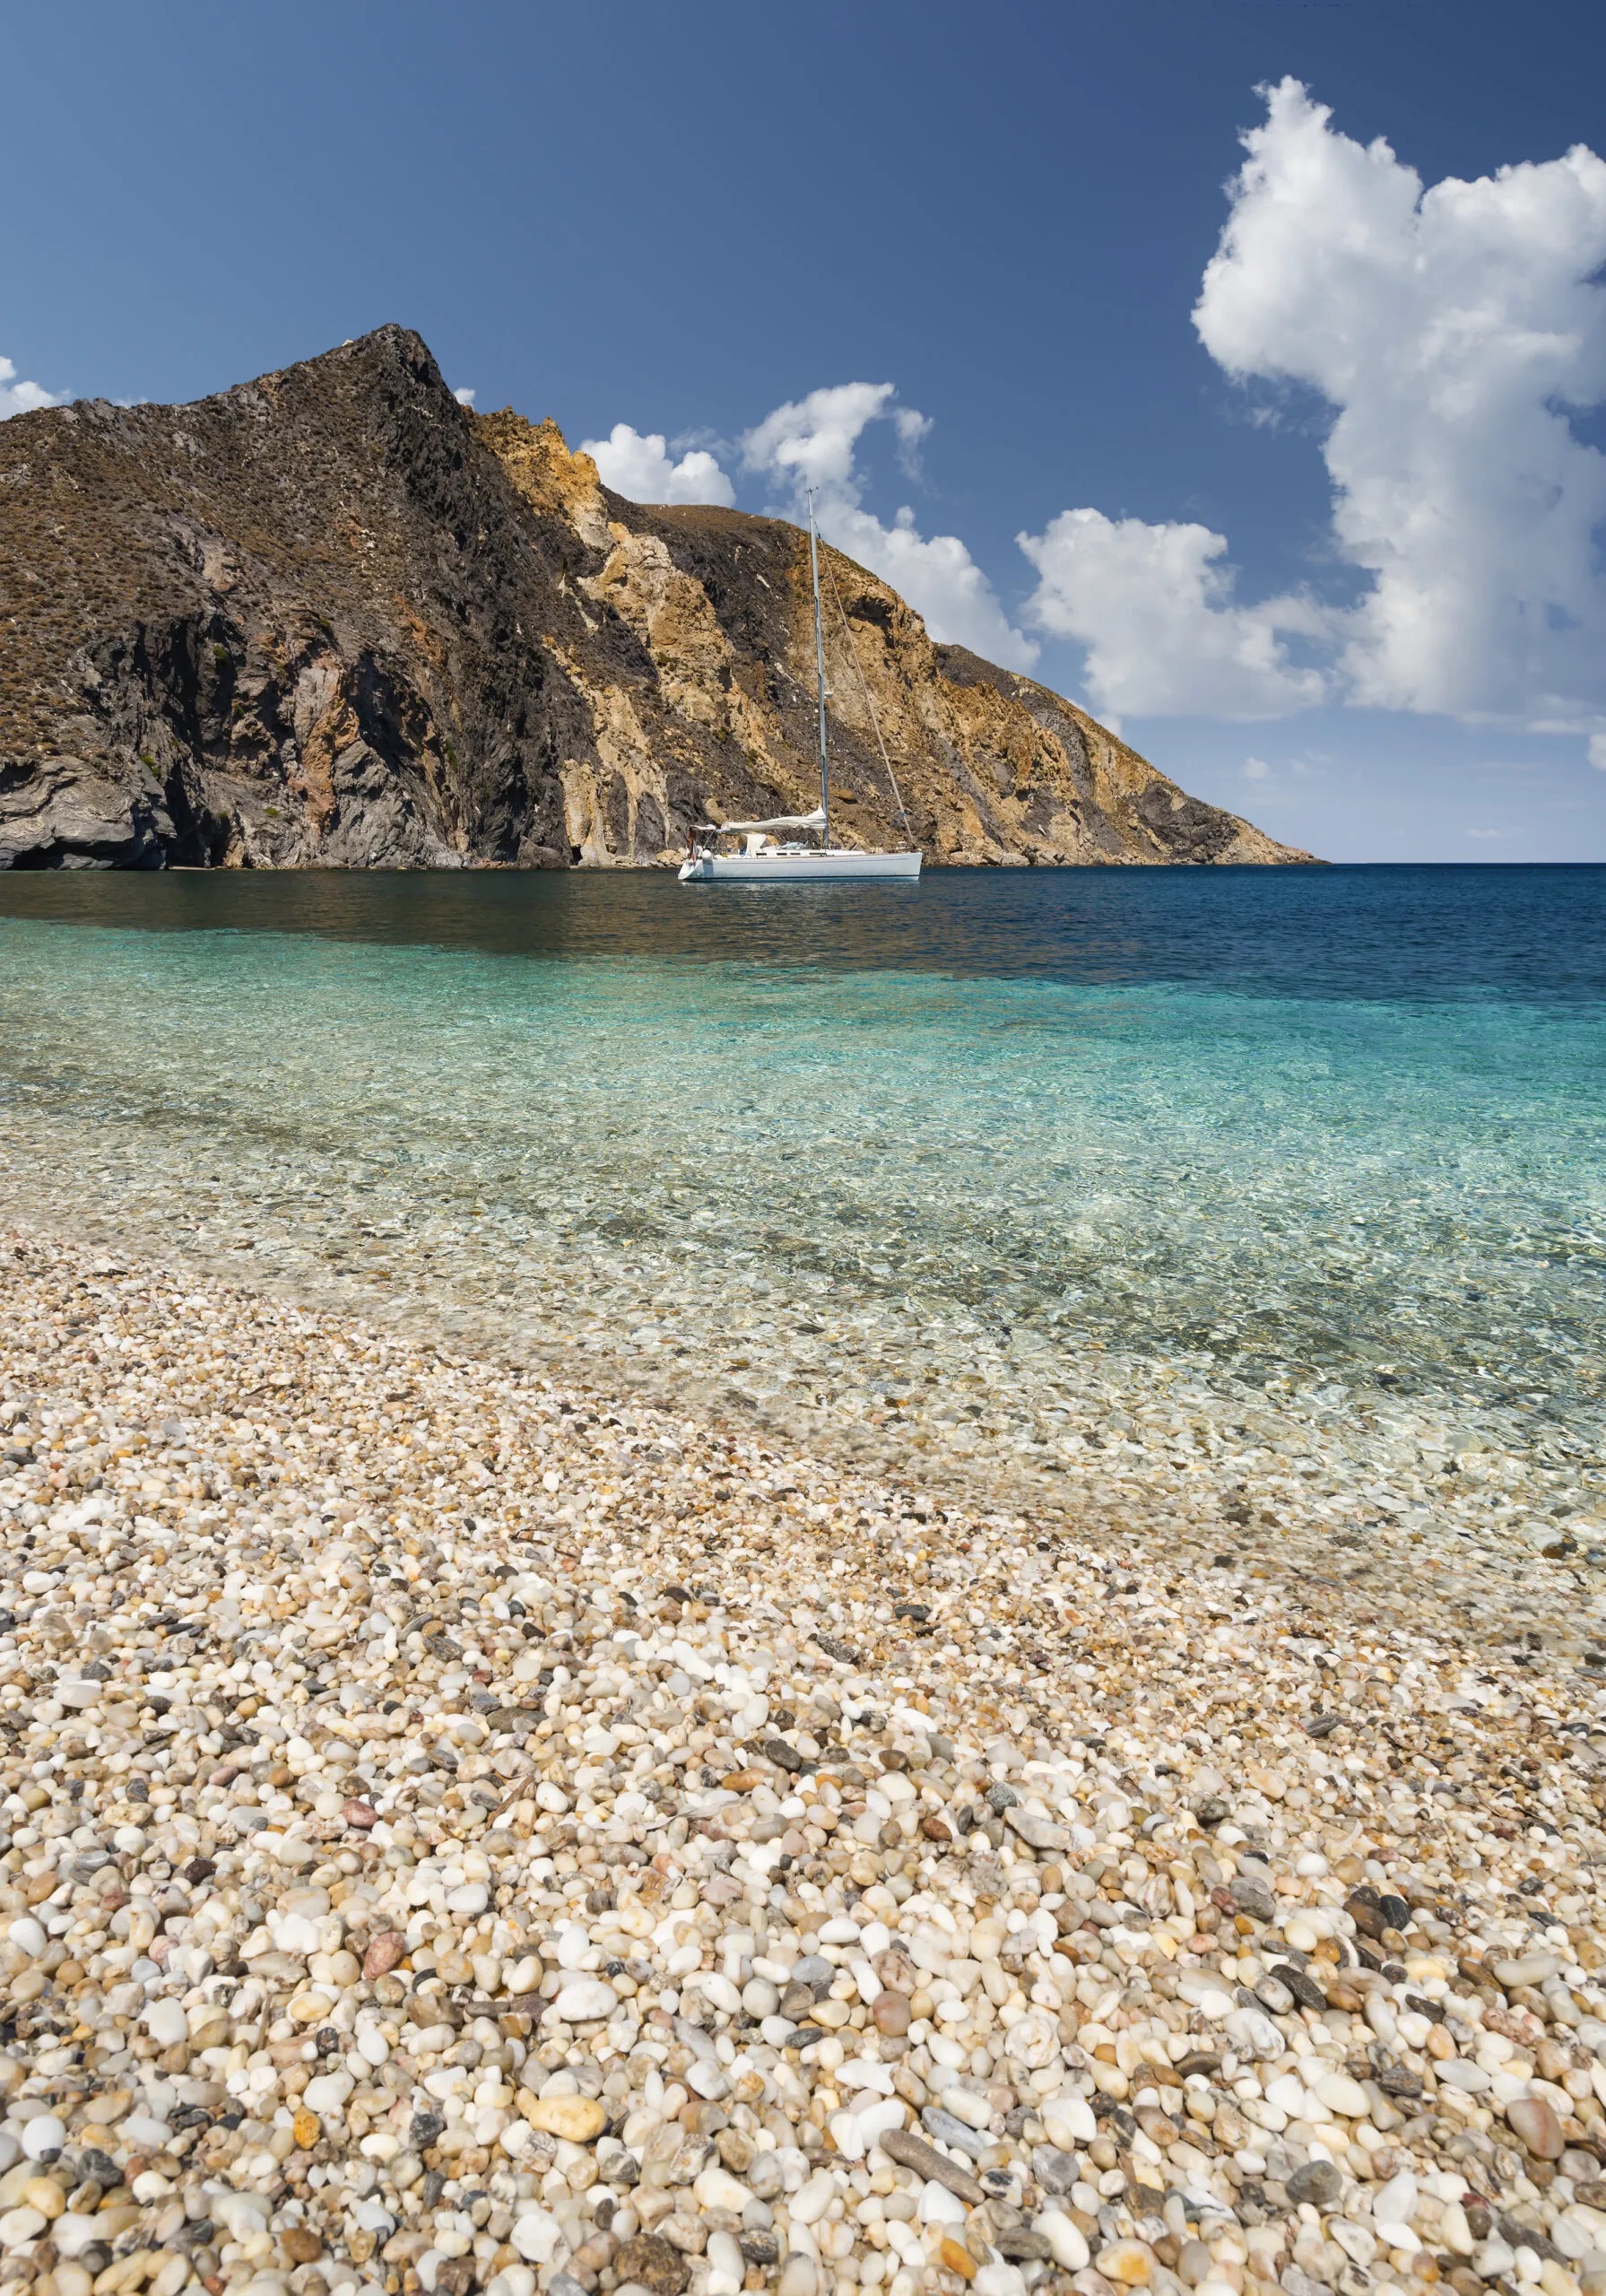 This small island of the North Aegean Sea is blessed with stunning natural scenery, including crystal-clear waters, unspoiled beaches, and rugged landscapes.